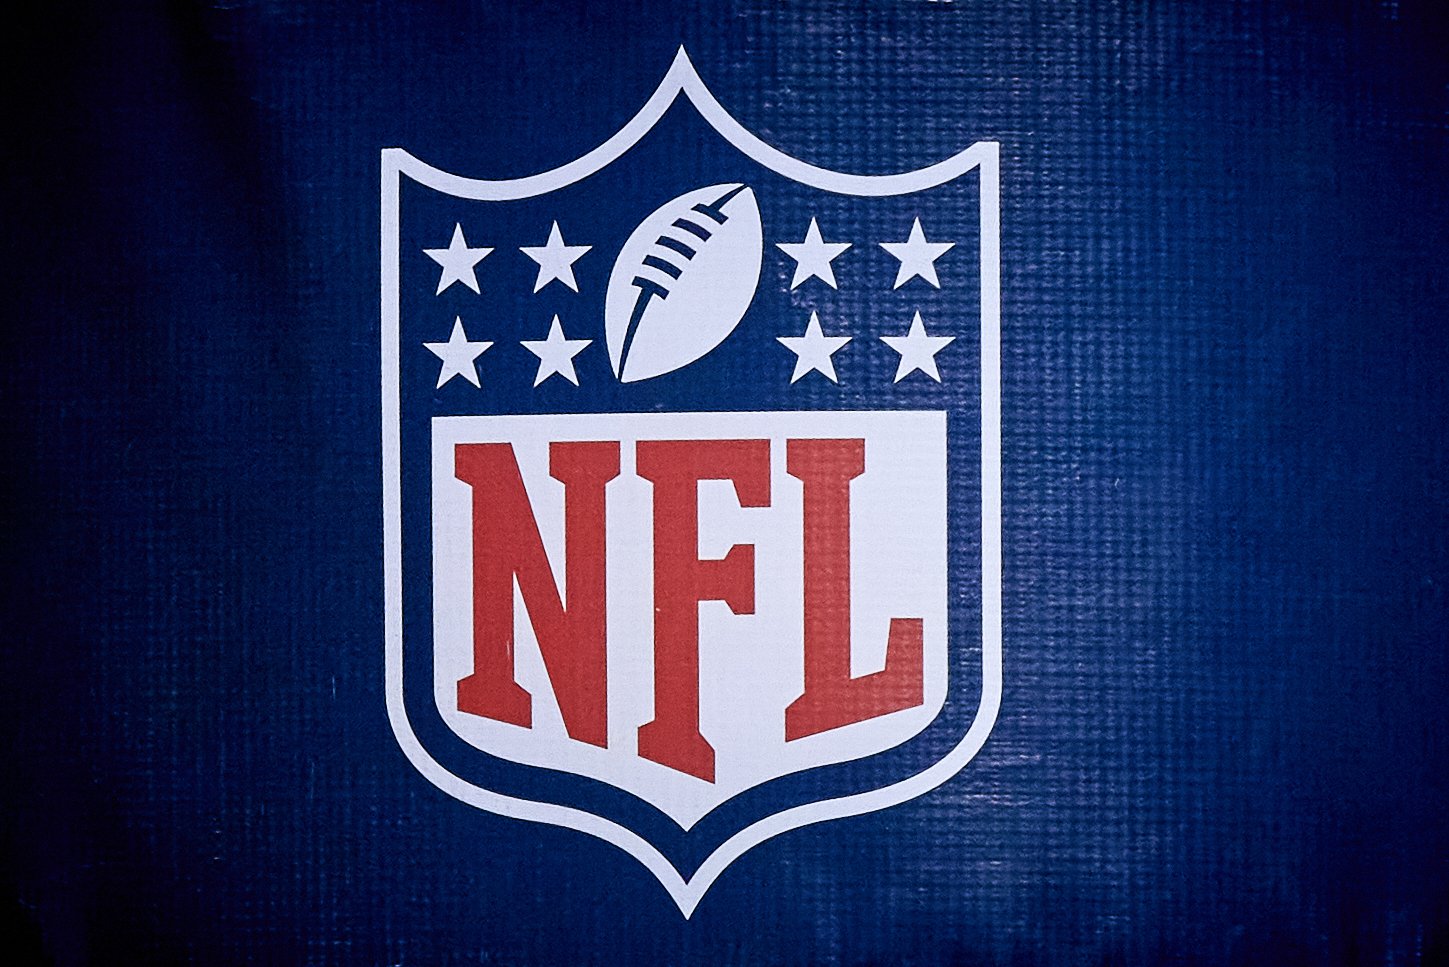 A detailed view of the NFL crest logo on a goal post